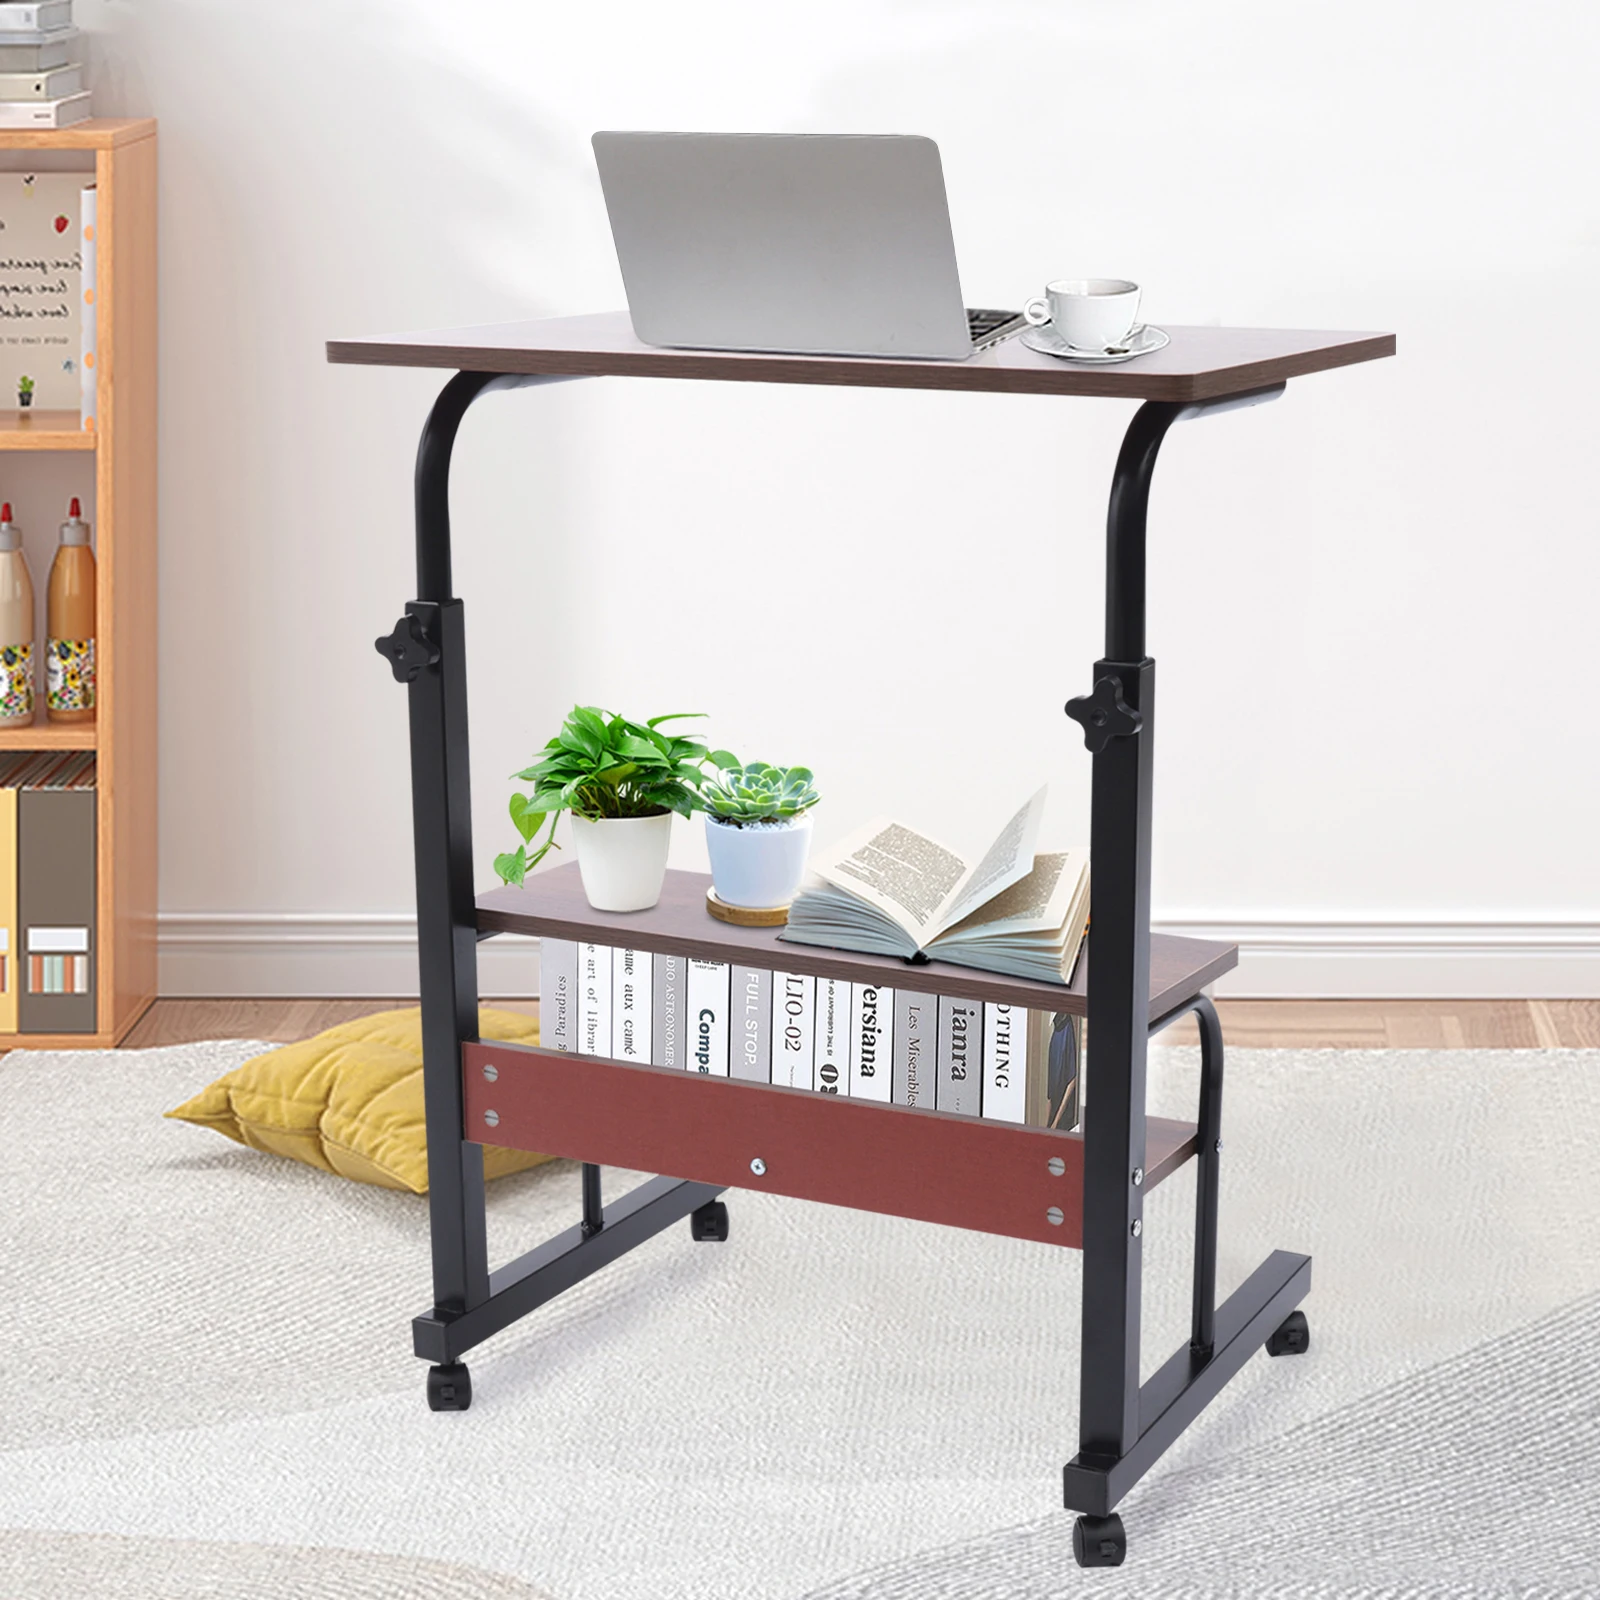 adjustable width removable stable cpu stand base rack desktop brake with wheels computer cases host bracket waterproof cpu stand Rolling Side Table Adjustable Height Mobile Laptop Side Table With Double Storage Rack